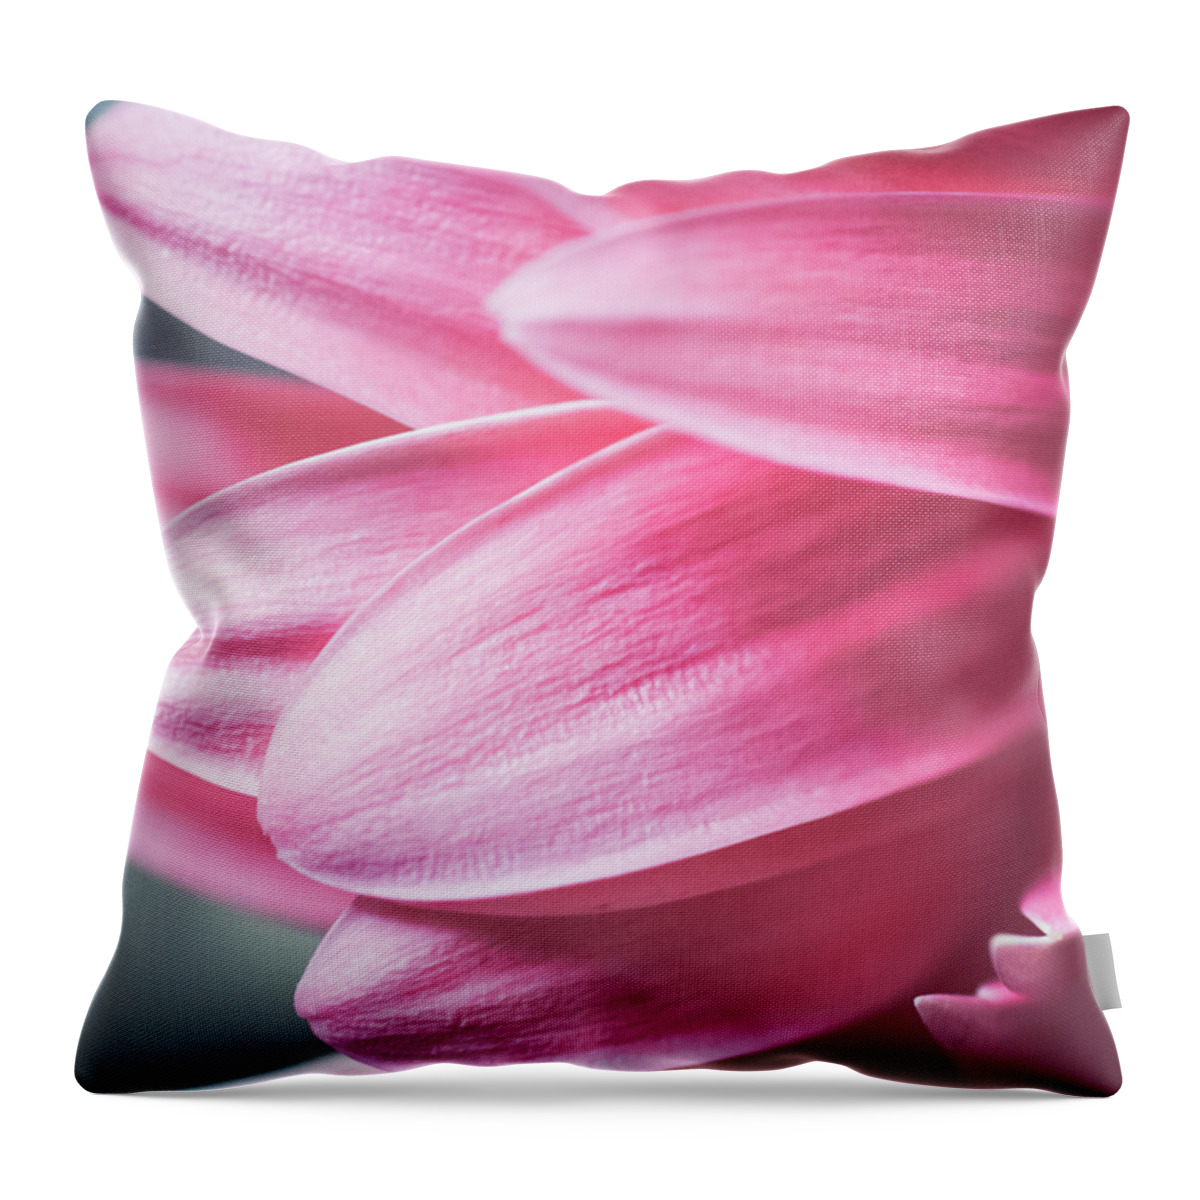 Almond Shaped Throw Pillow featuring the photograph Kindness Unafraid by Christi Kraft